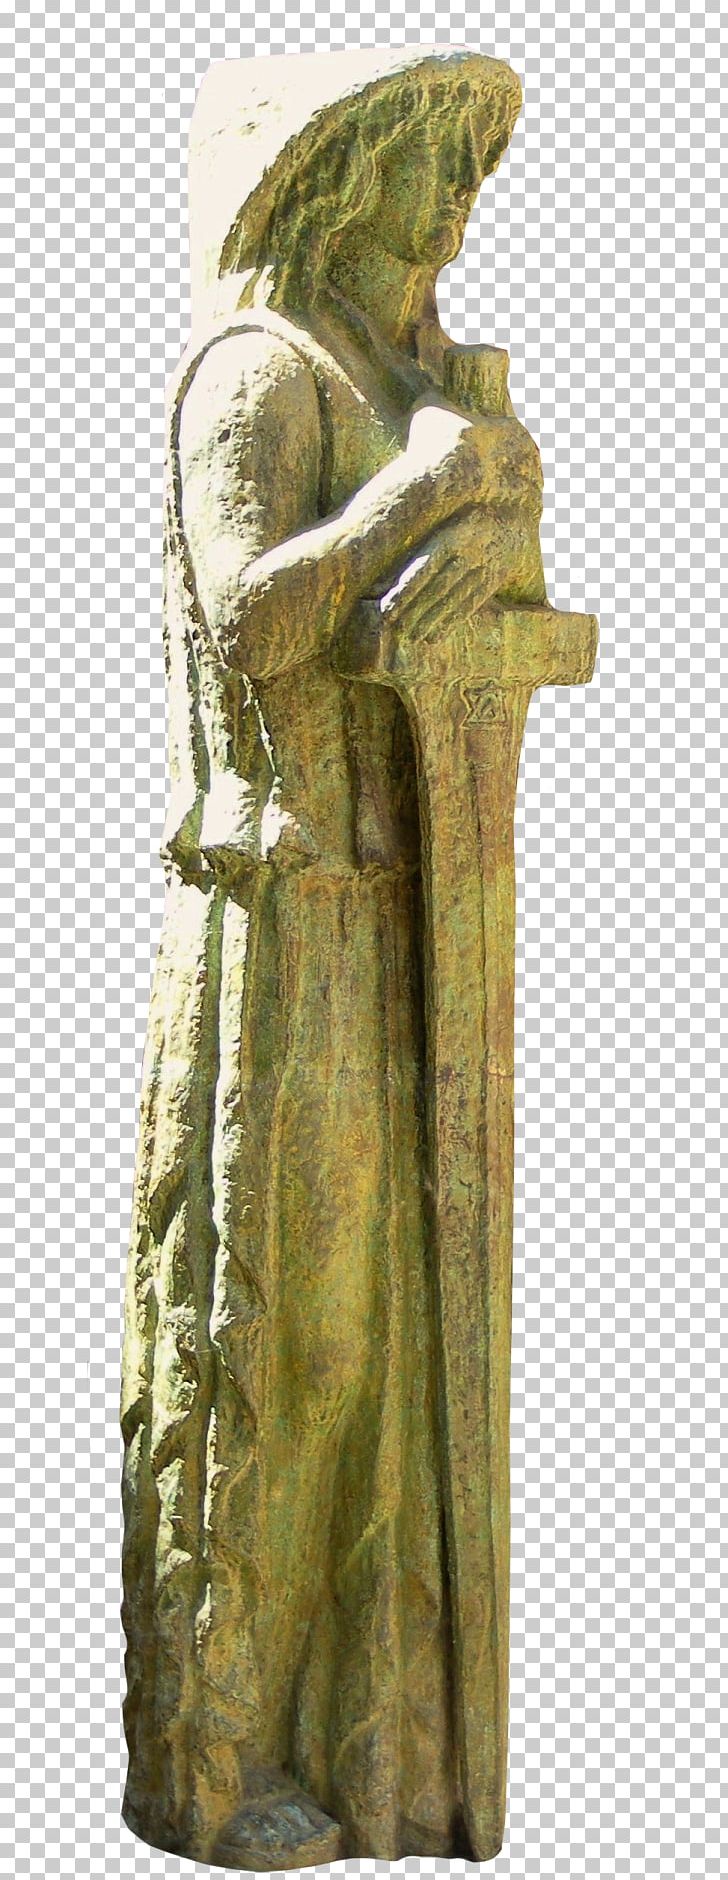 Statue Classical Sculpture Figurine Ancient History PNG, Clipart, Ancient History, Artifact, Bronze, Bronze Sculpture, Classical Sculpture Free PNG Download